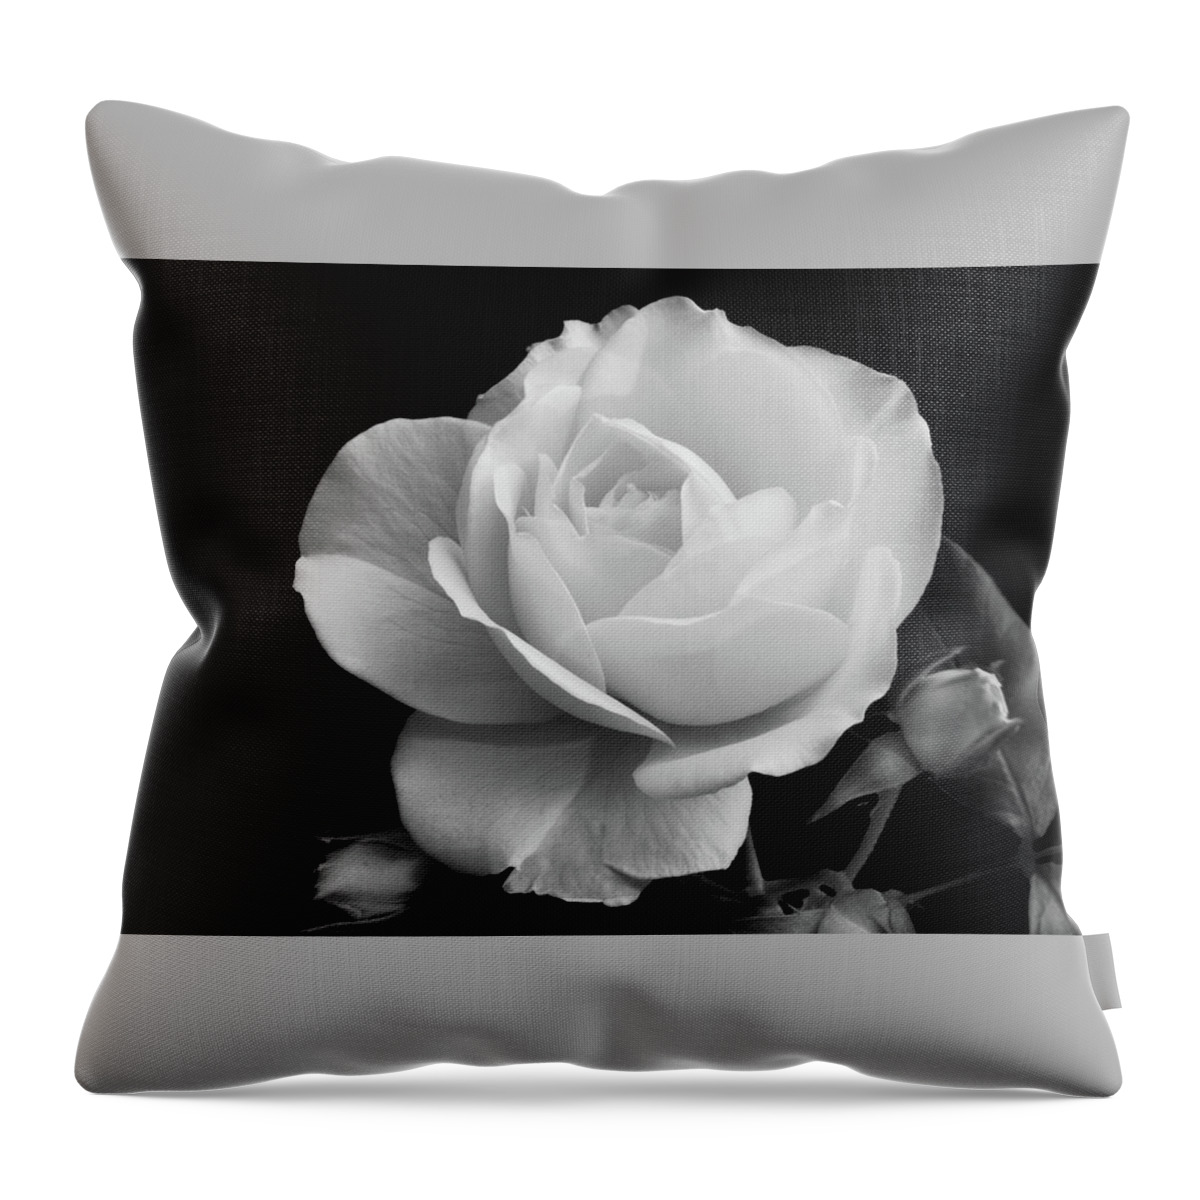 Rose Throw Pillow featuring the photograph October Rose by Terence Davis